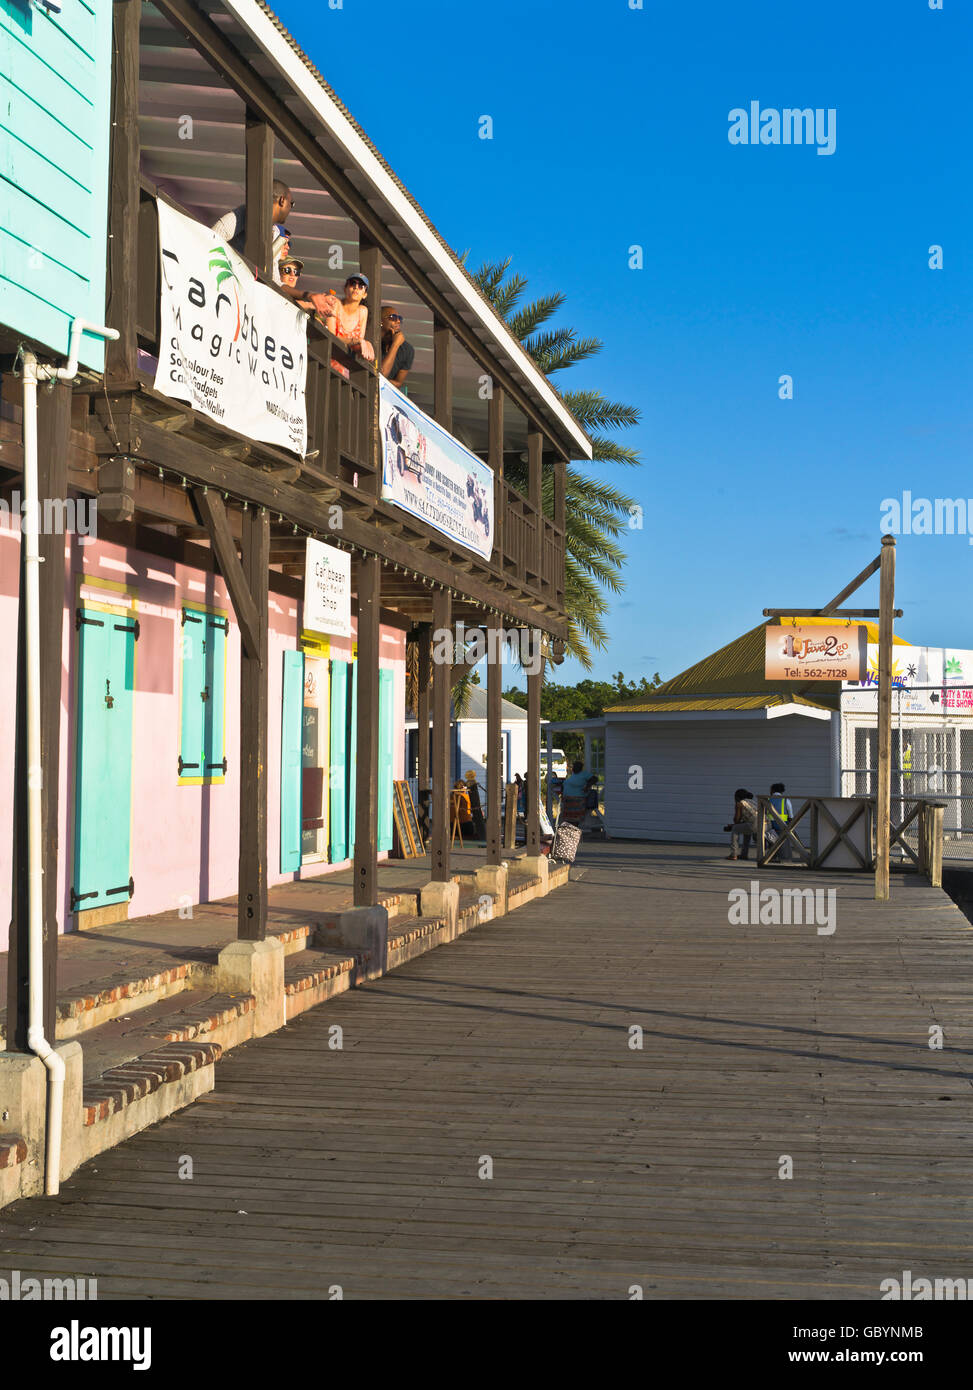 dh St Johns ANTIGUA CARIBBEAN Redcliffe quay people Caribbean waterfront bar Stock Photo